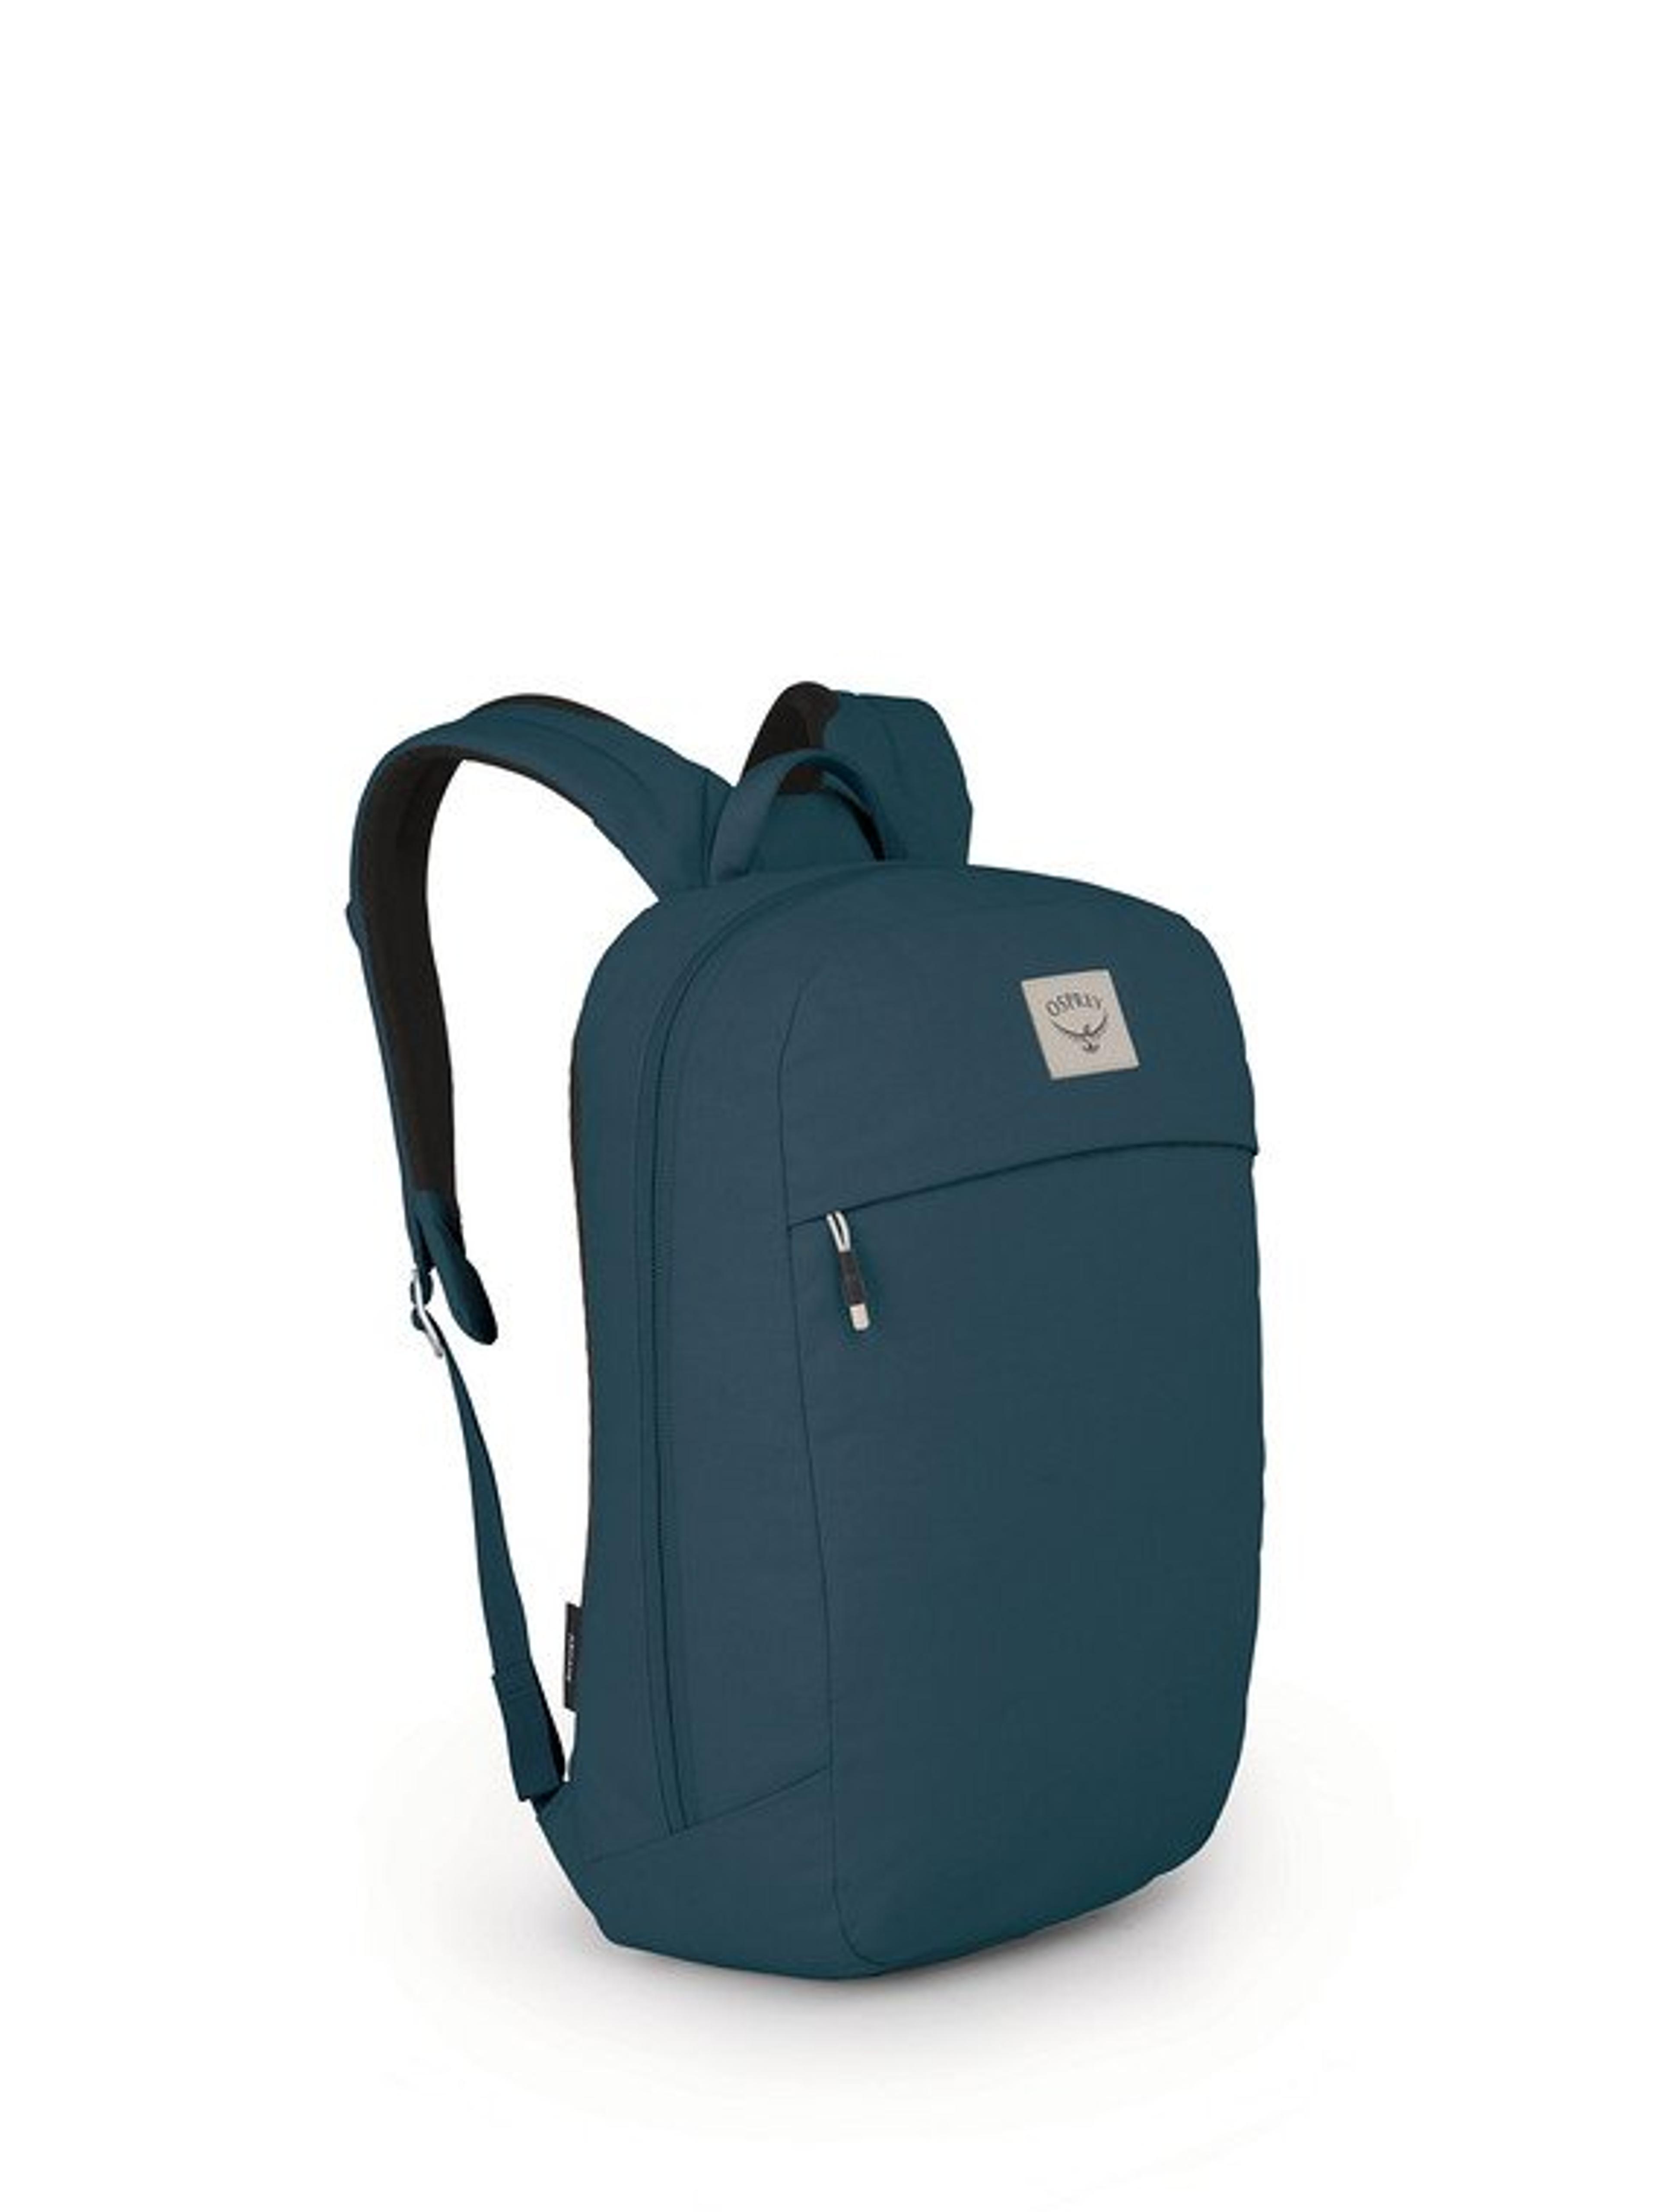 Arcane Large Day Pack - Everyday Pack - Recycled - Osprey Packs Official Site